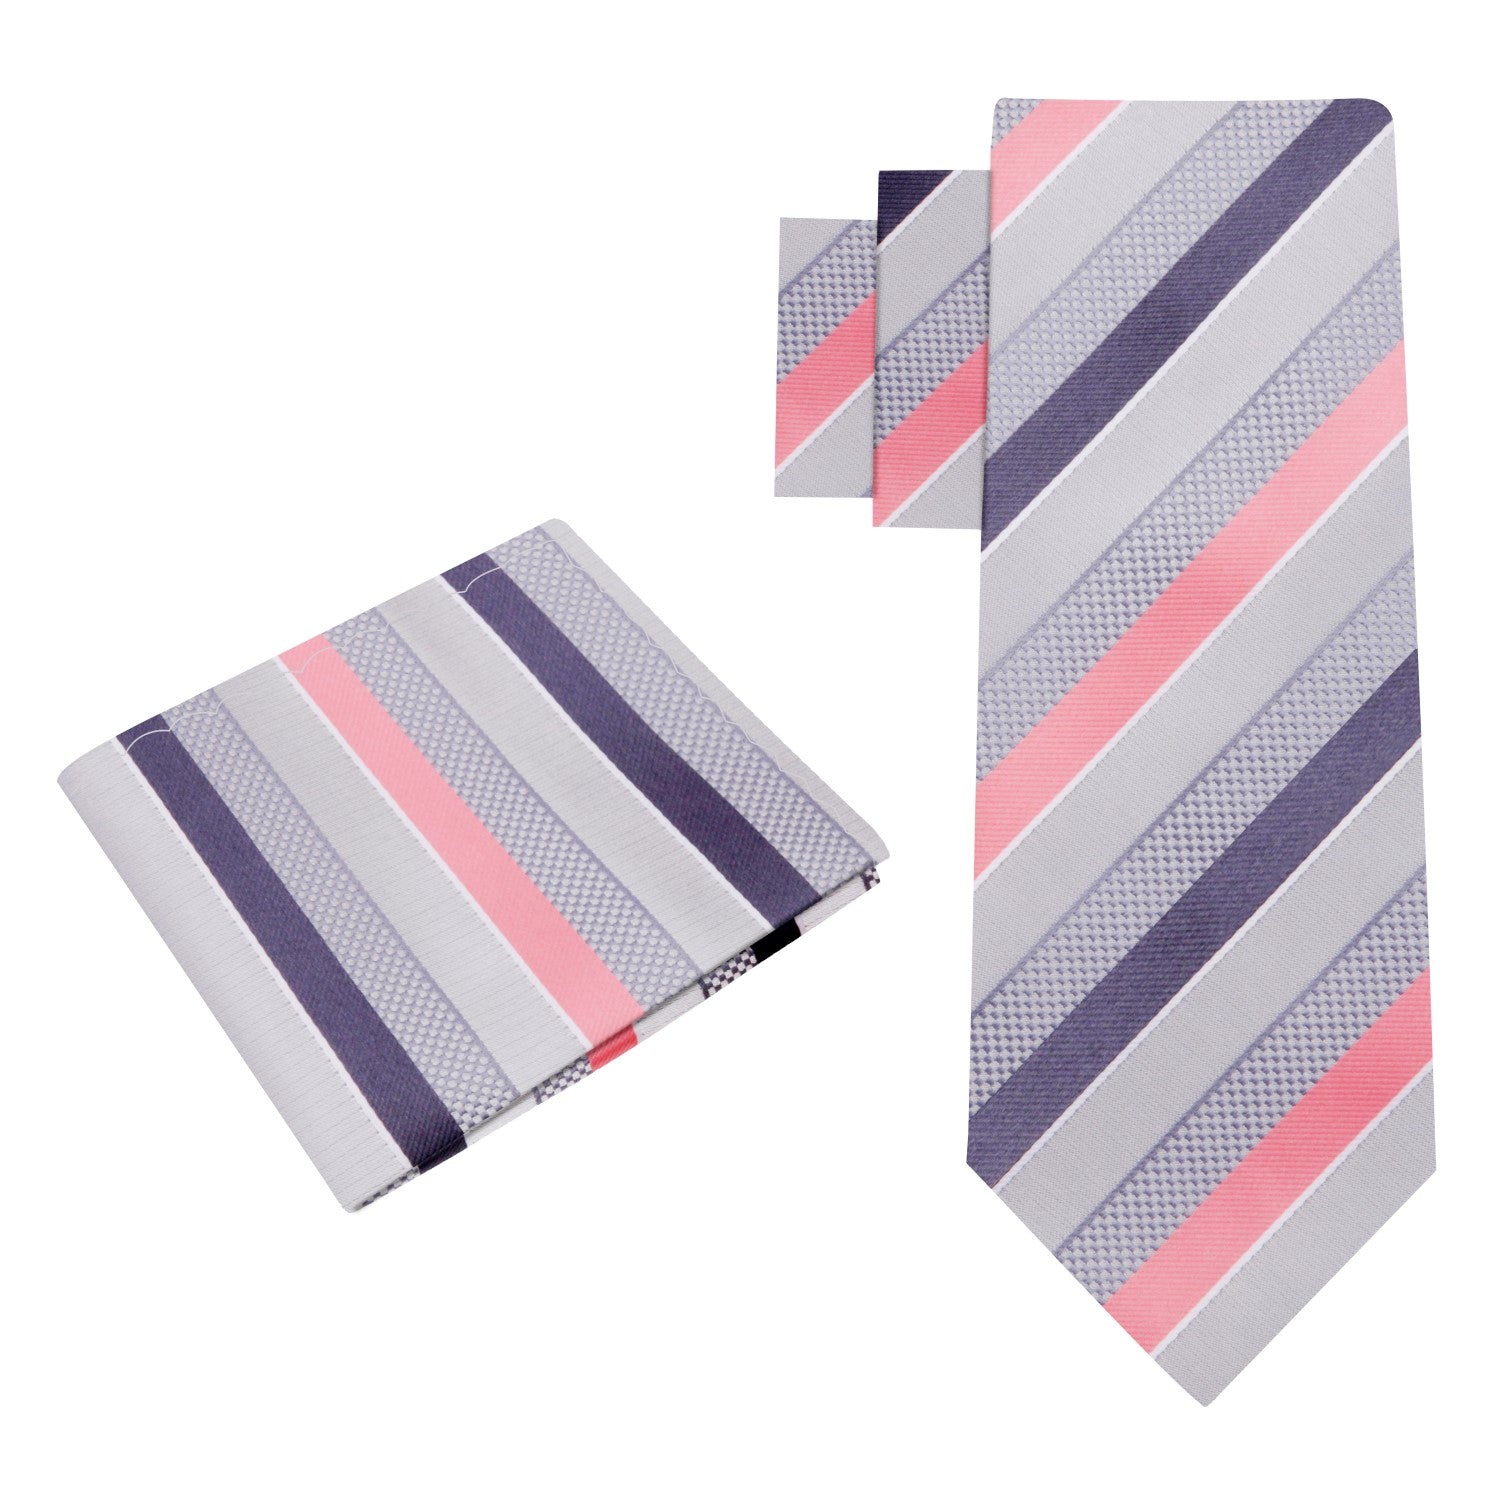 Alt View: Grey, Pink Stripe Thin Tie and Pocket Square